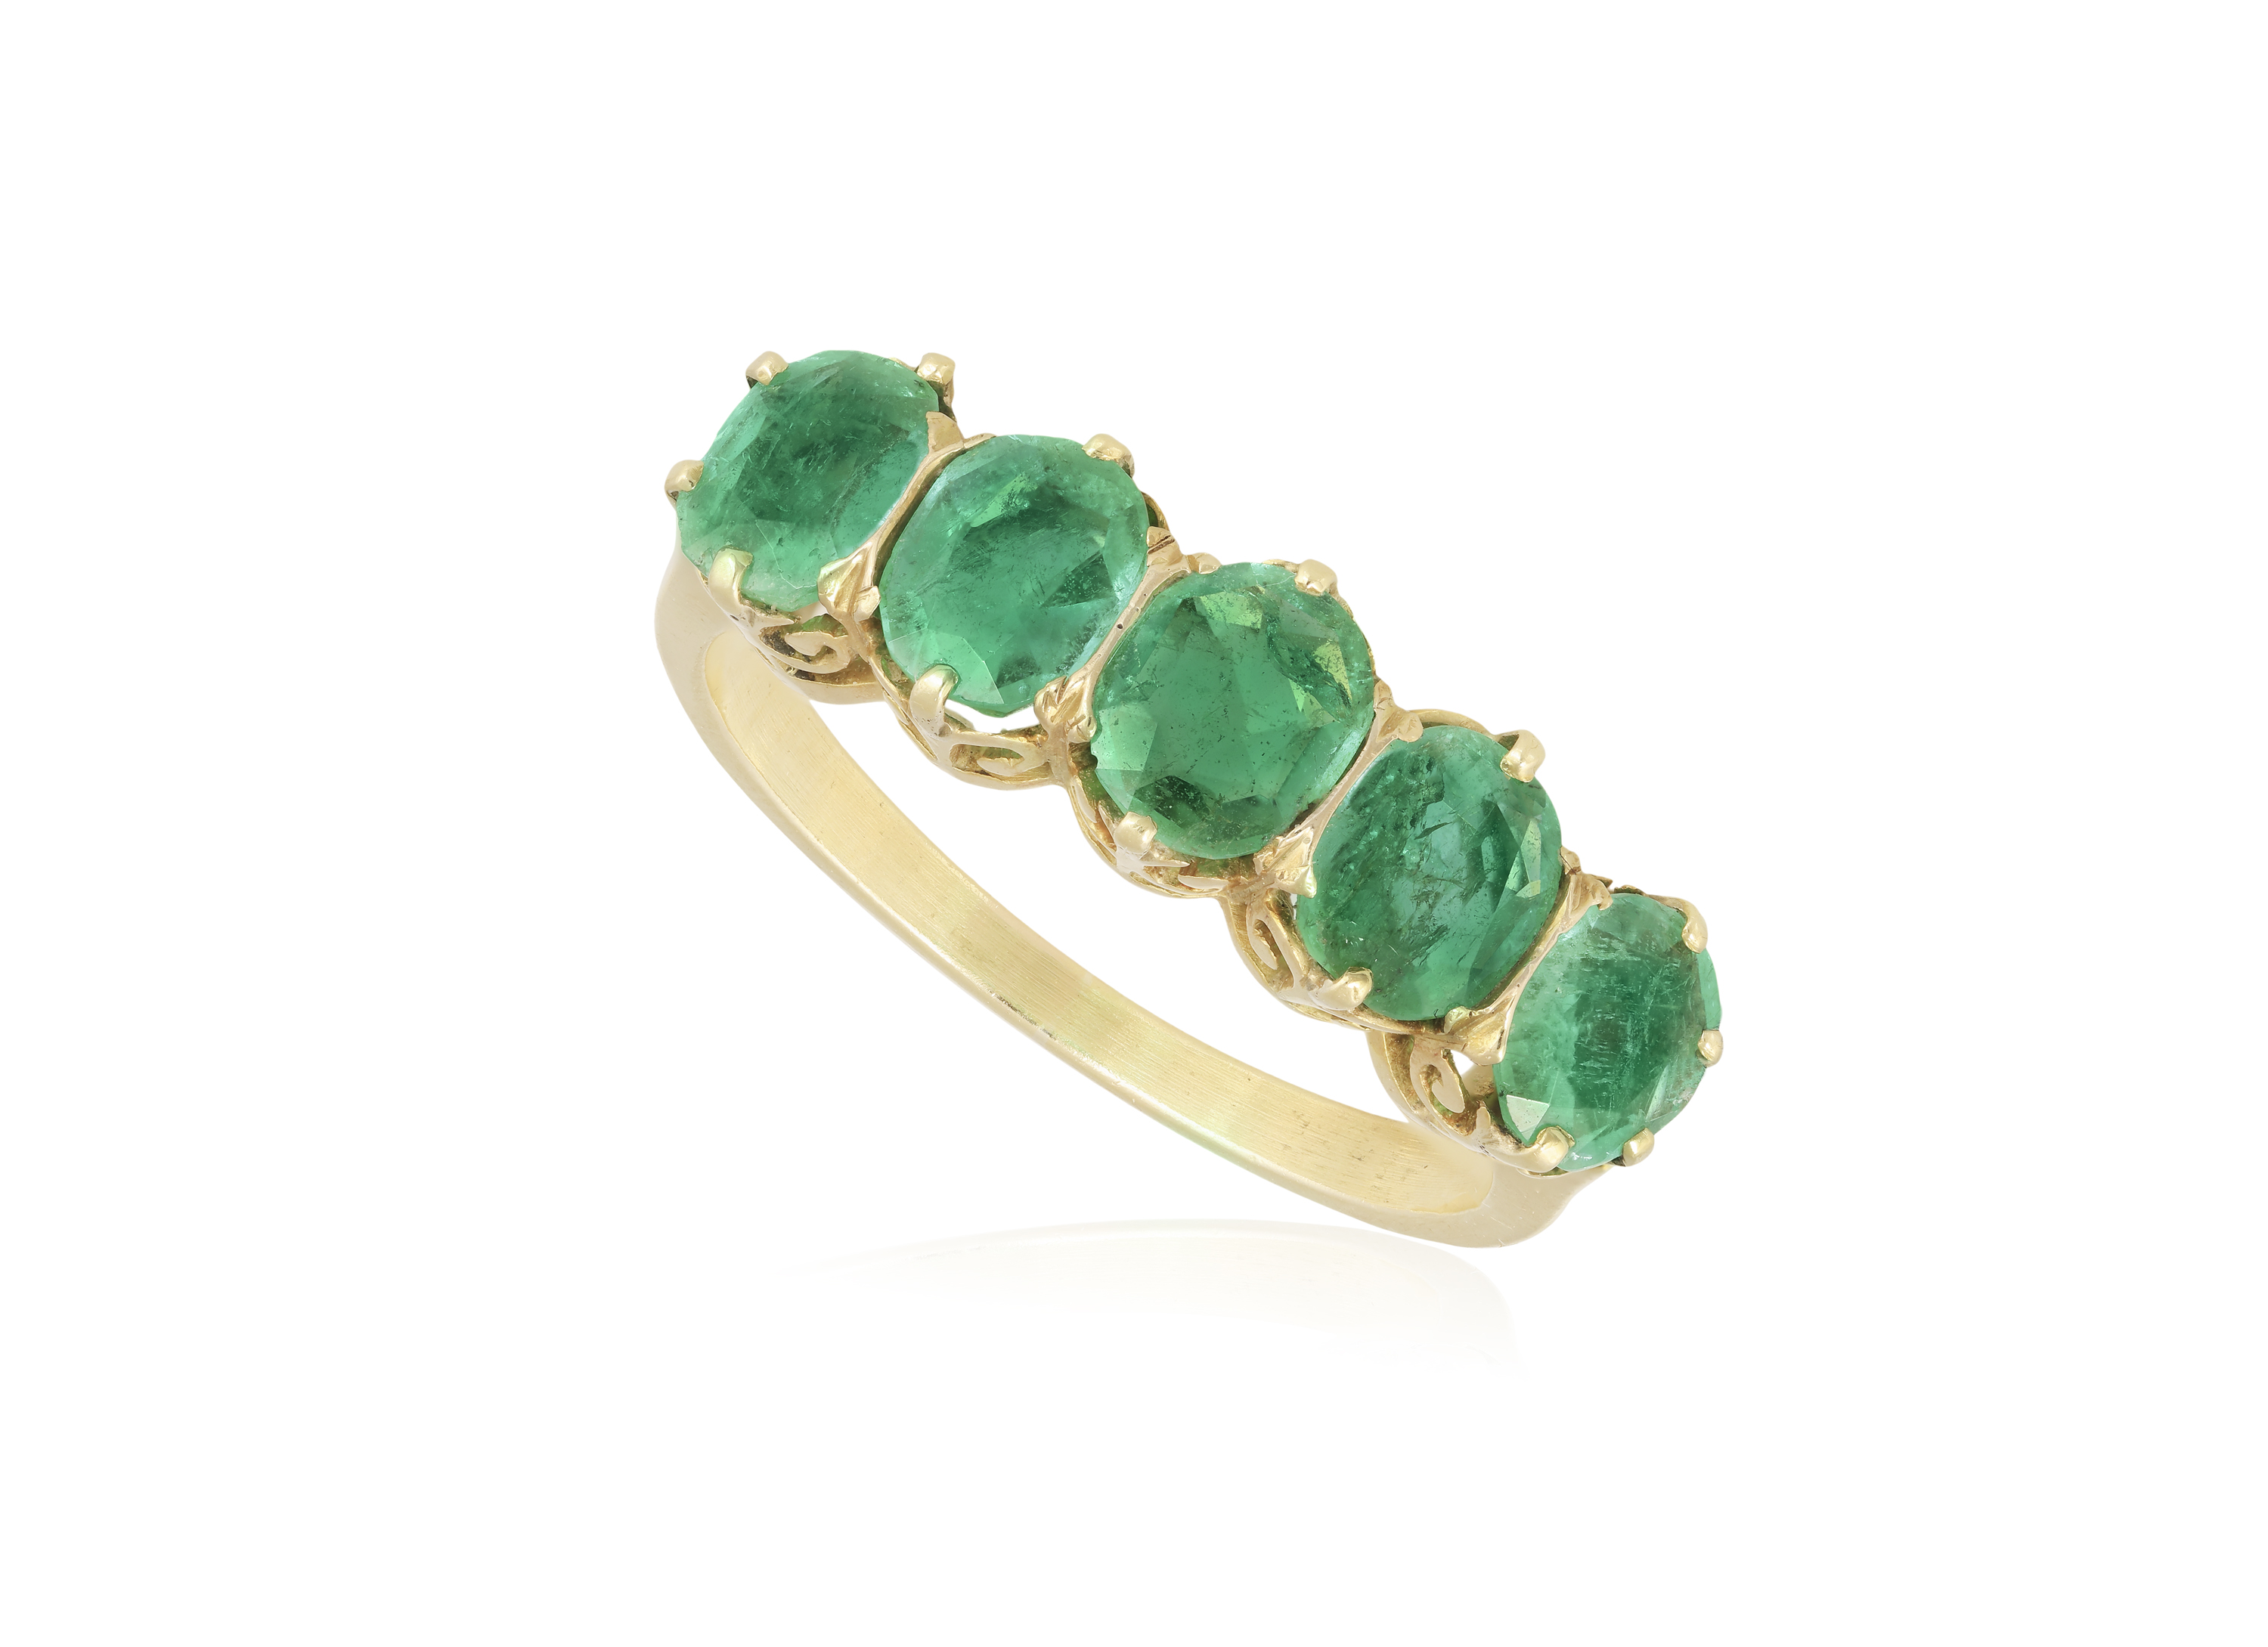 AN EMERALD FIVE-STONE RING Set with a graduated row of oval-shaped emeralds with claw-setting, to